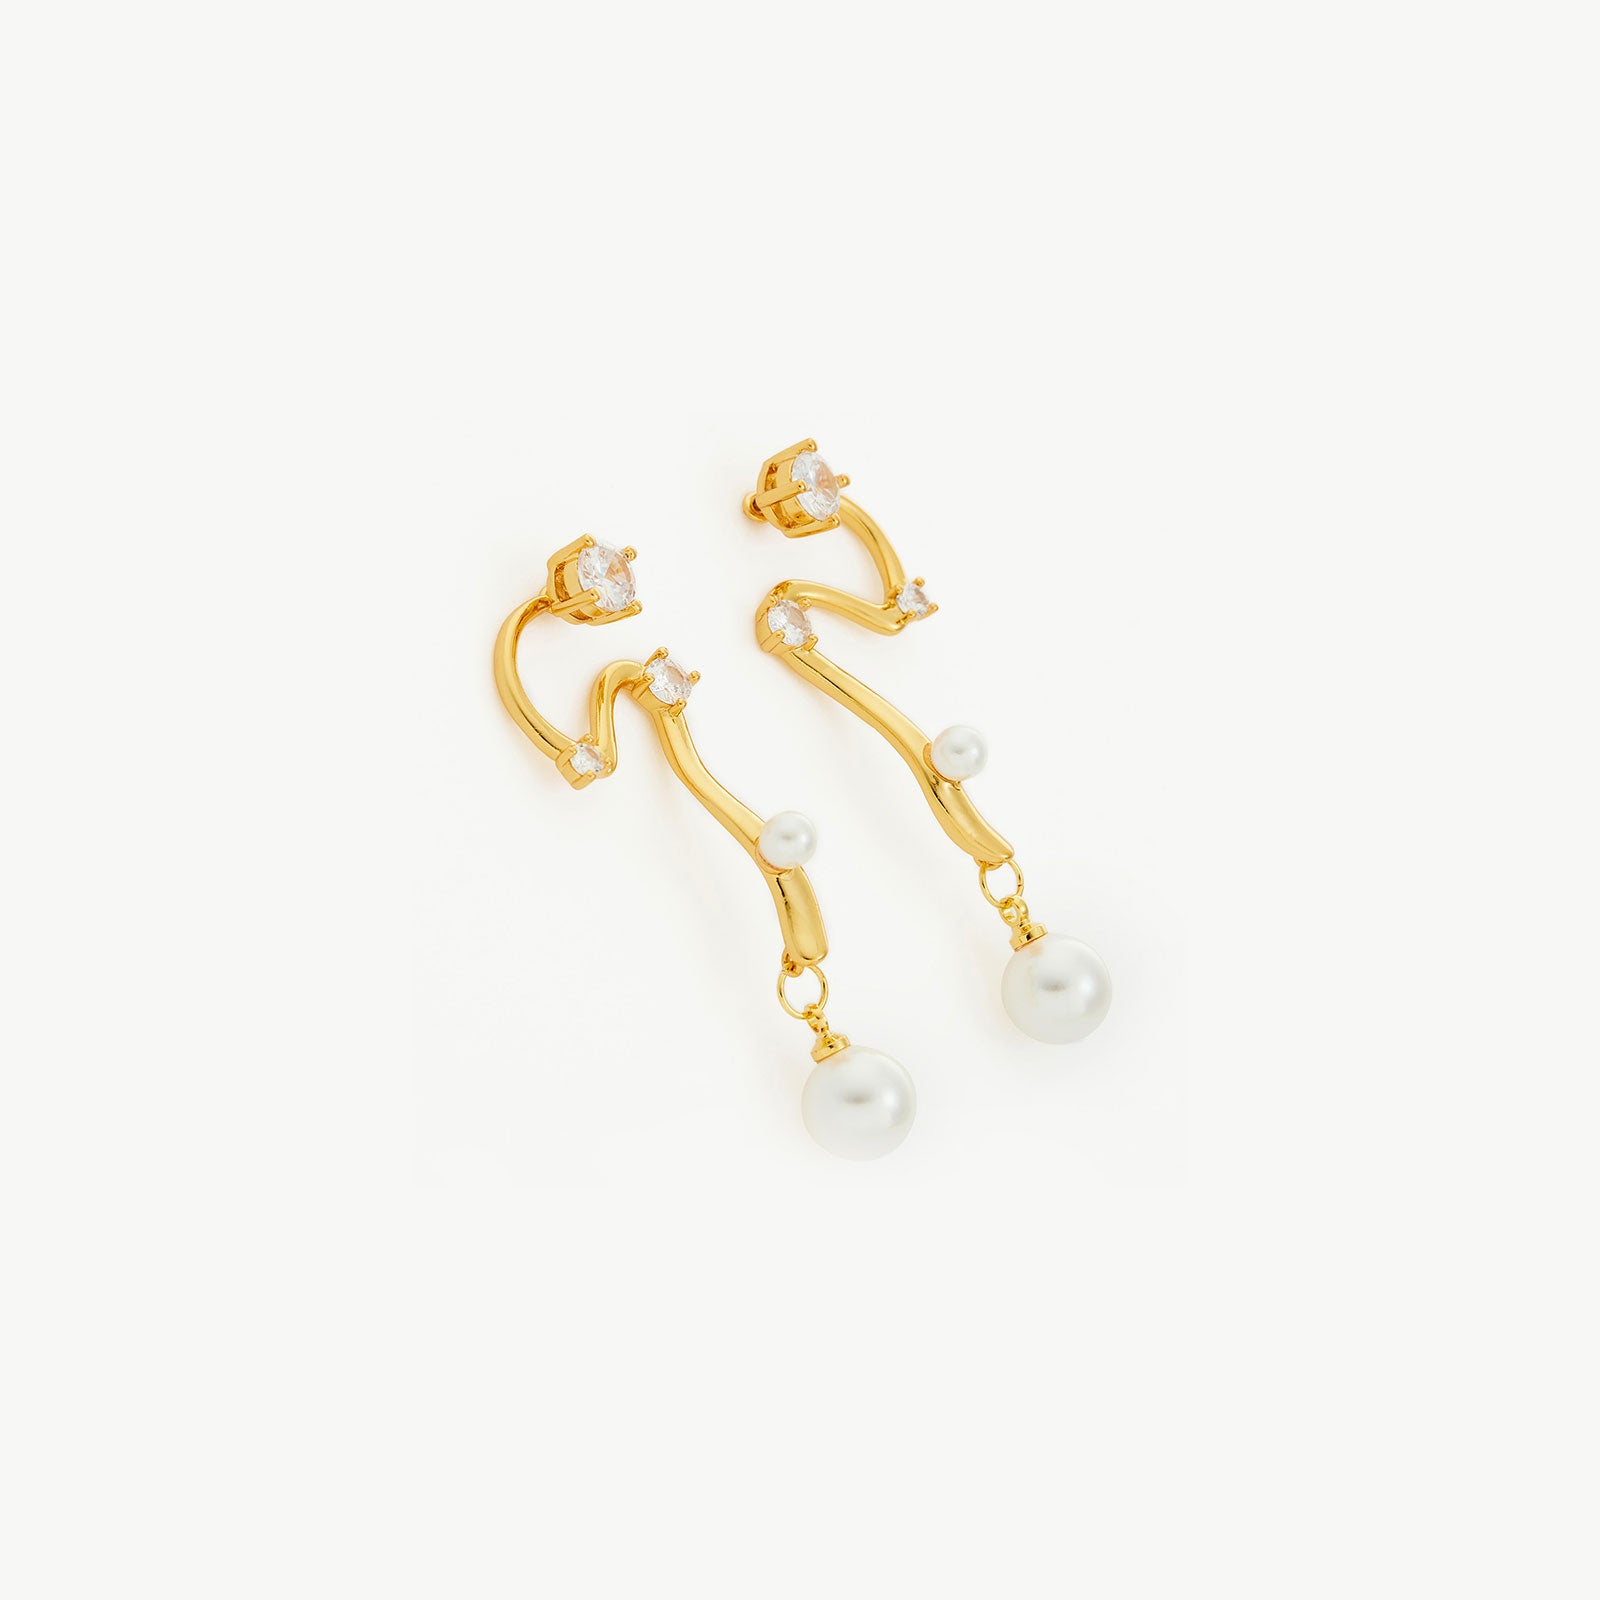 Serpent Pearl Drop Earrings, a captivating blend of serpent-inspired design and elegant pearl drops, creating a sophisticated and alluring accessory for any occasion